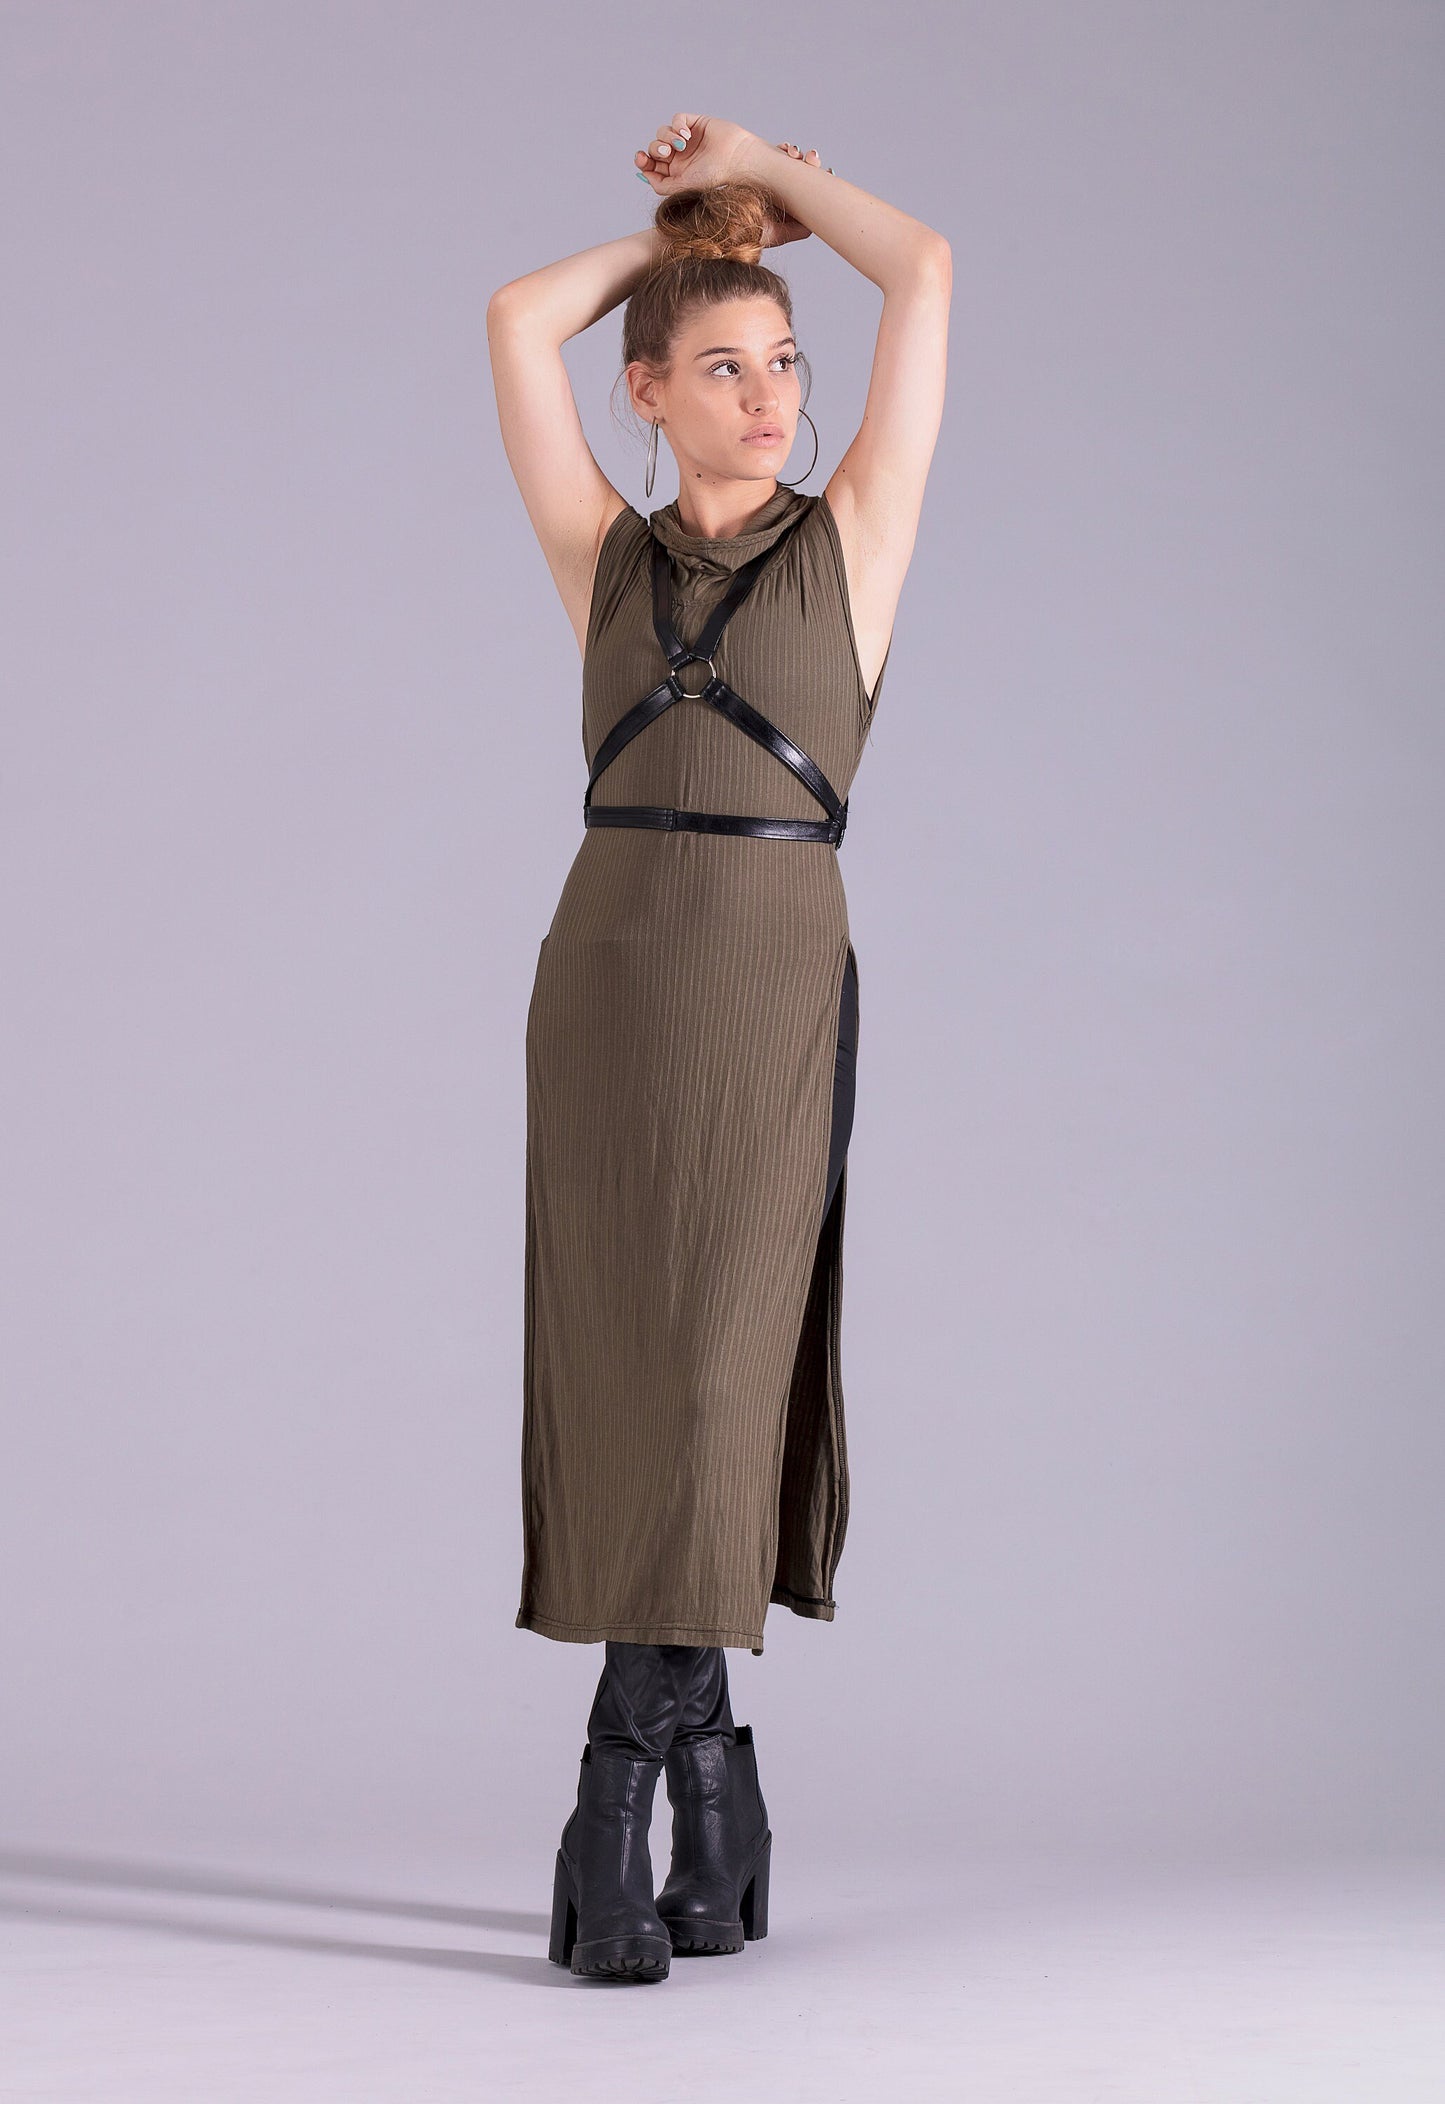 Warrior post apocalyptic hooded tunic dress | Olive